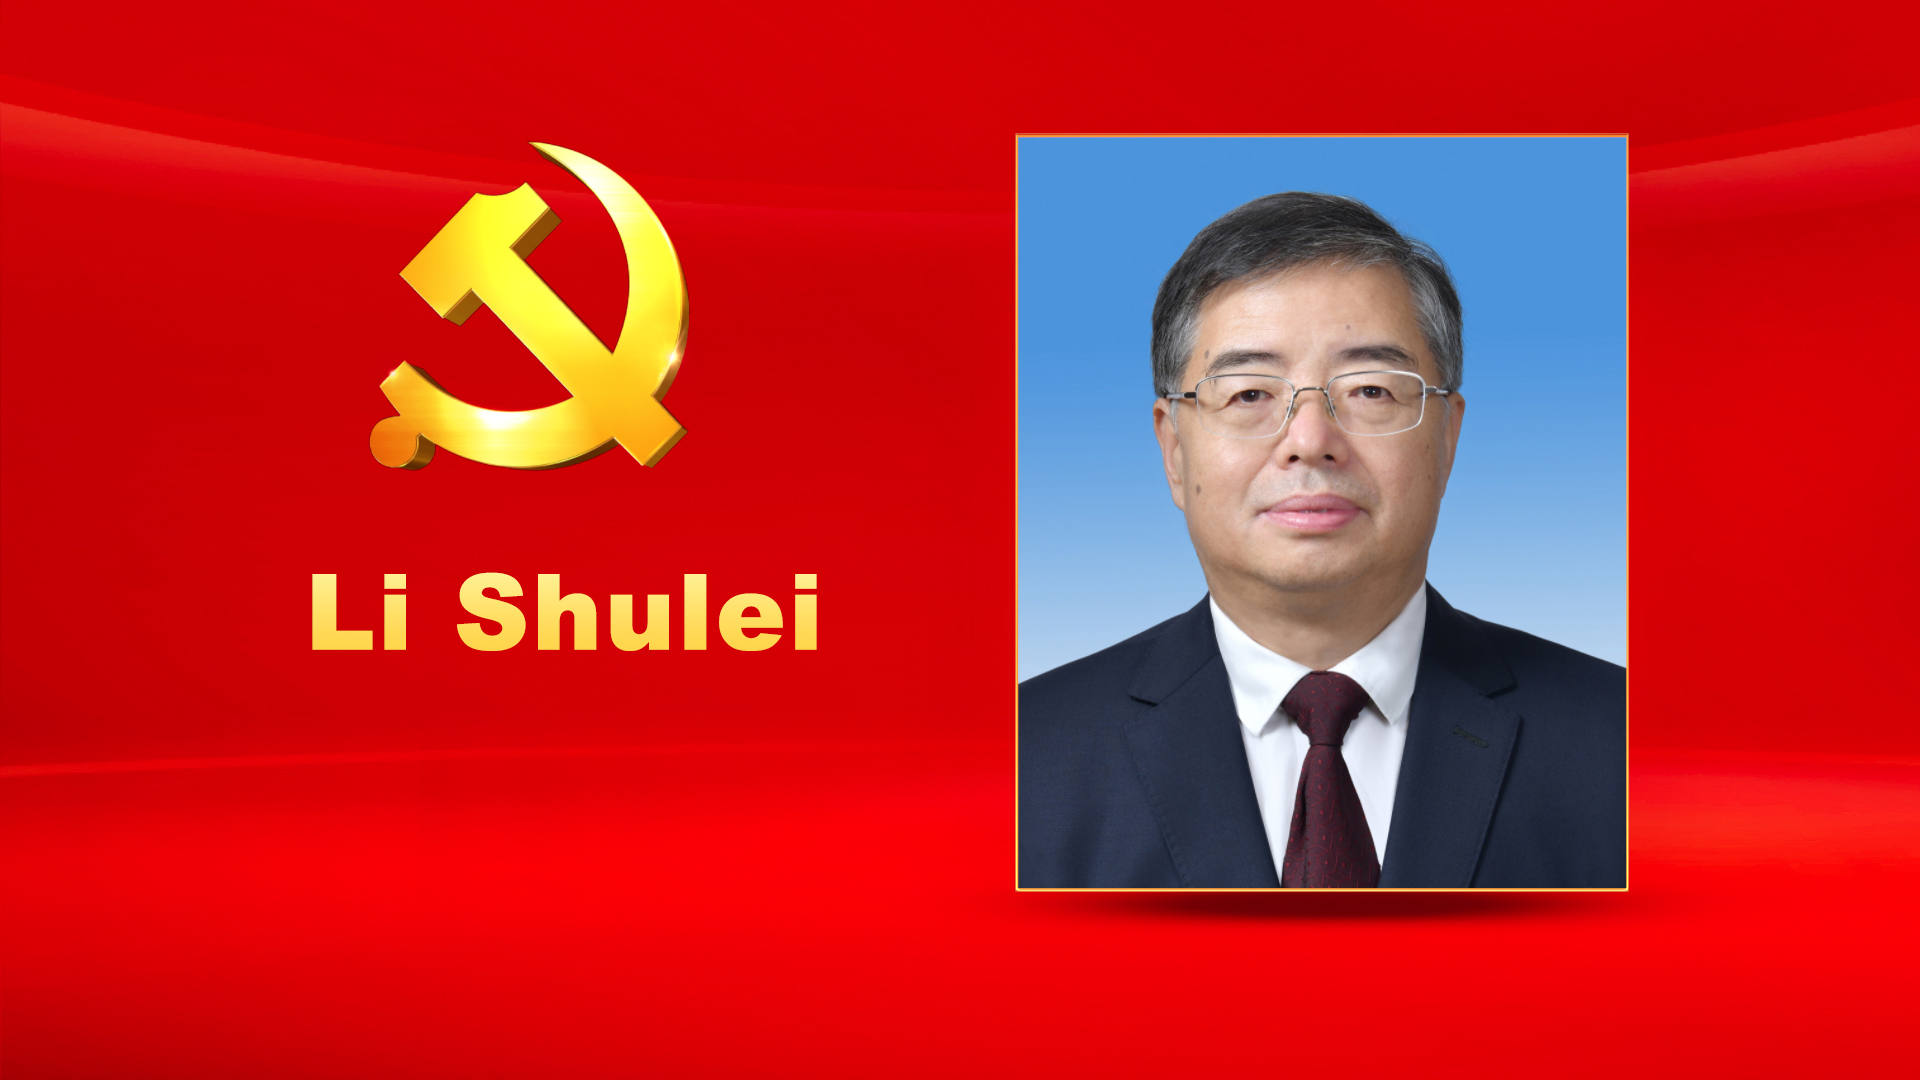 Li Shulei, male, Han ethnicity, was born in January 1964 and is from Yuanyang, Henan Province. He began his first job in December 1984 and joined the Communist Party of China (CPC) in September 1986. Li graduated from Department of Chinese Language and Literature, Peking University where he completed a graduate program in modern Chinese literature and received a Master of Arts degree. He holds a professional title of professor. Li is currently a member of the CPC Central Committee Political Bureau, a member of the CPC Central Committee Secretariat, and Deputy Head of Publicity Department of the CPC Central Committee in charge of routine work.